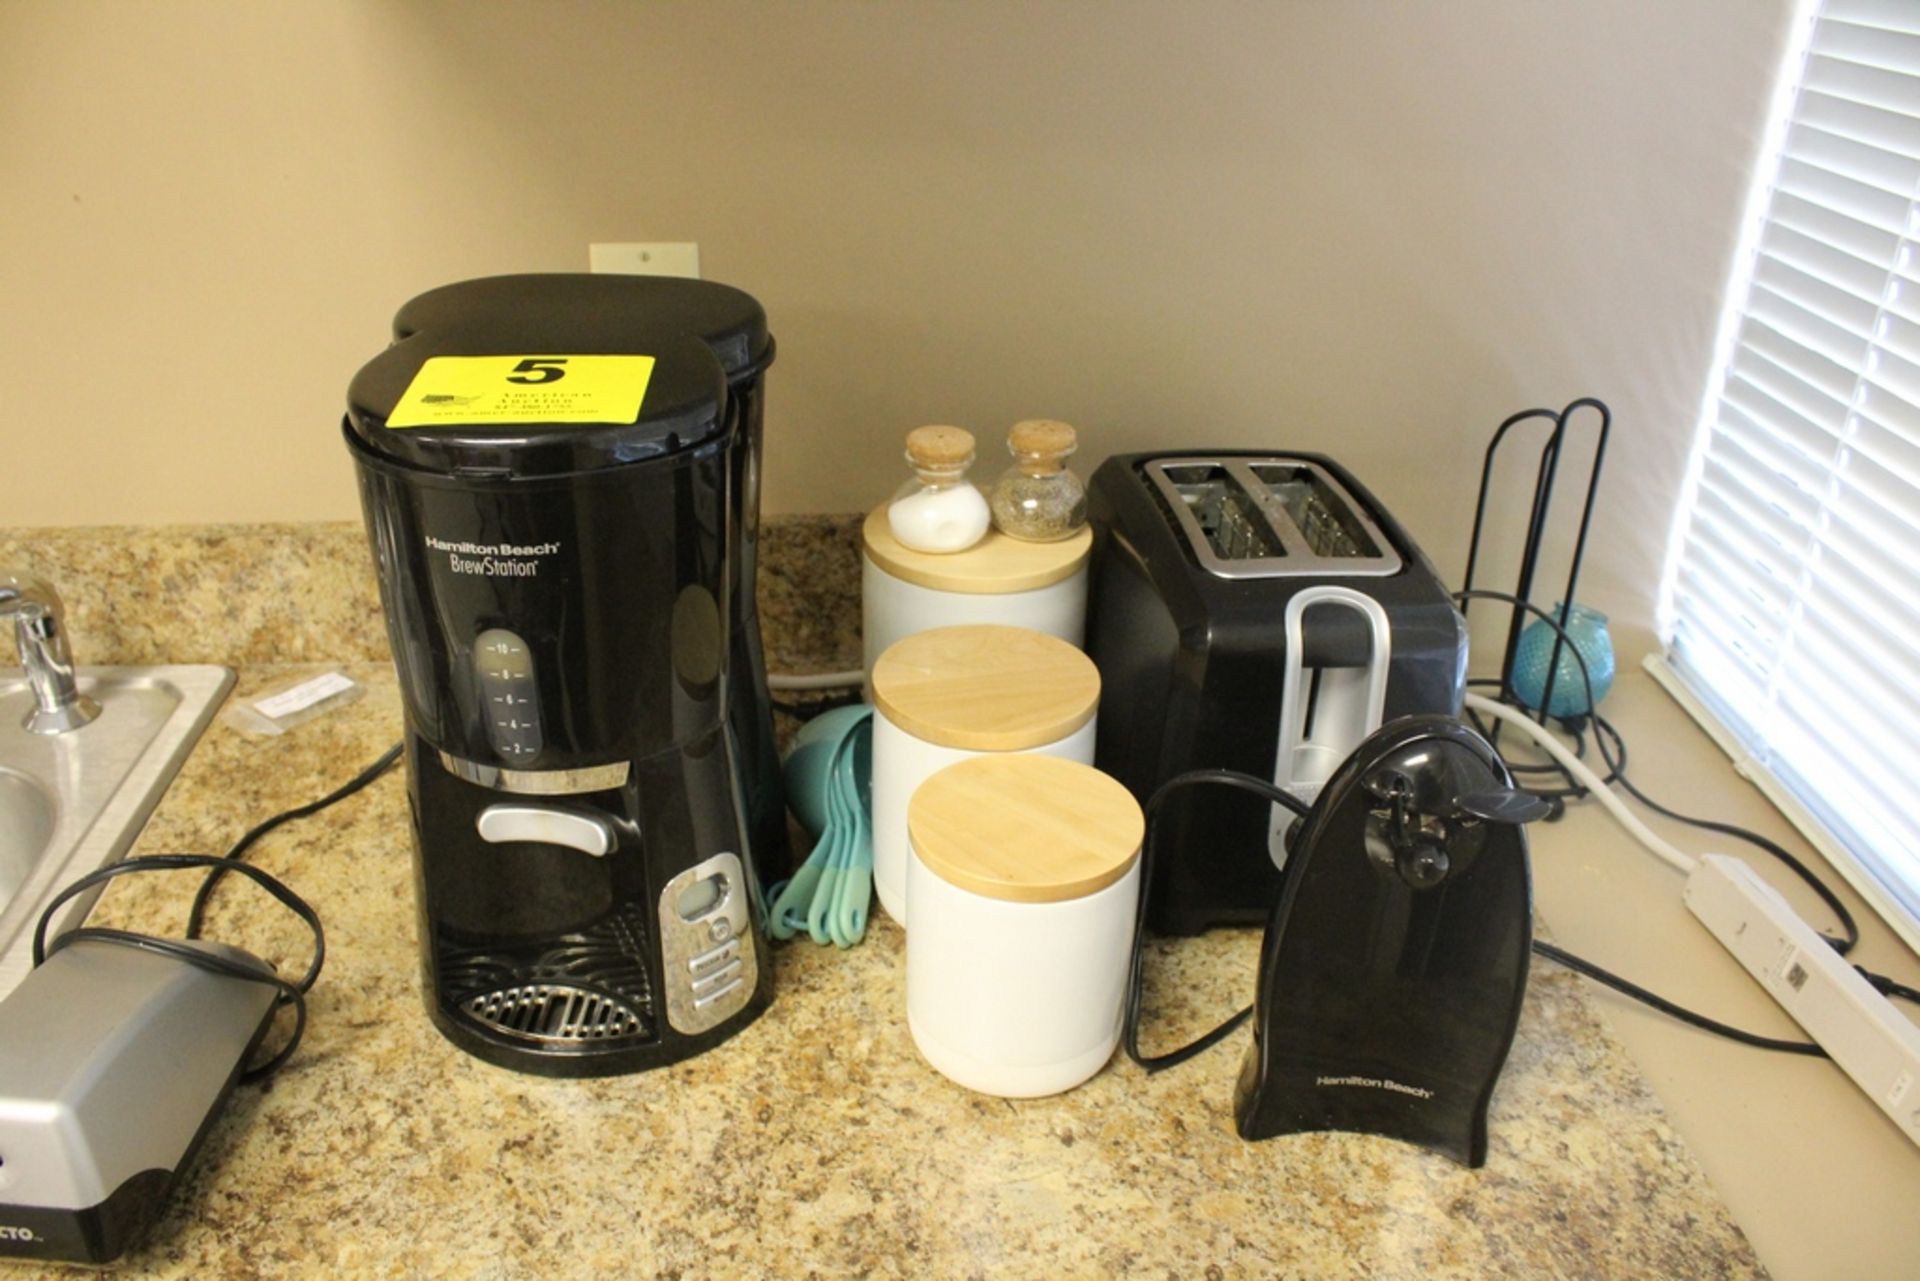 LOT-TOASTER, CAN OPENER, COFFEE BREWER & CONTAINERS